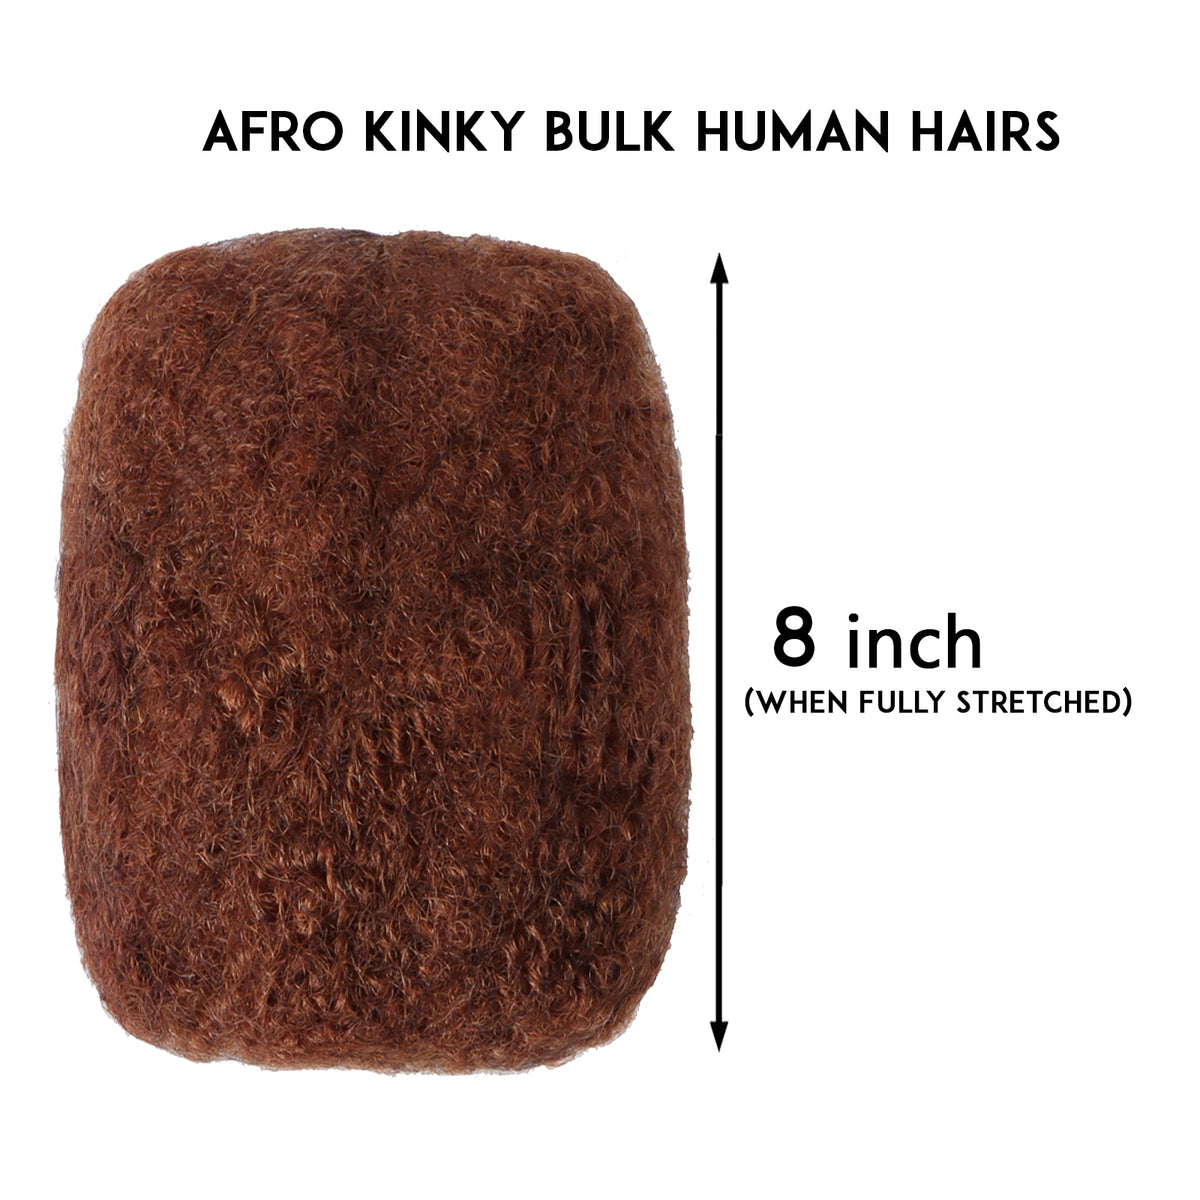 Afro Kinky Human Hairs For Making,Repairing & Bulking Locs 10 Inch Long Afro Kinky Bulk Human Hair For Dreadlock Extensions 100% Natural Afro Hairs For Twisting & Braiding 29g/1Oz (33/ Dark Auburn, 10 inch)